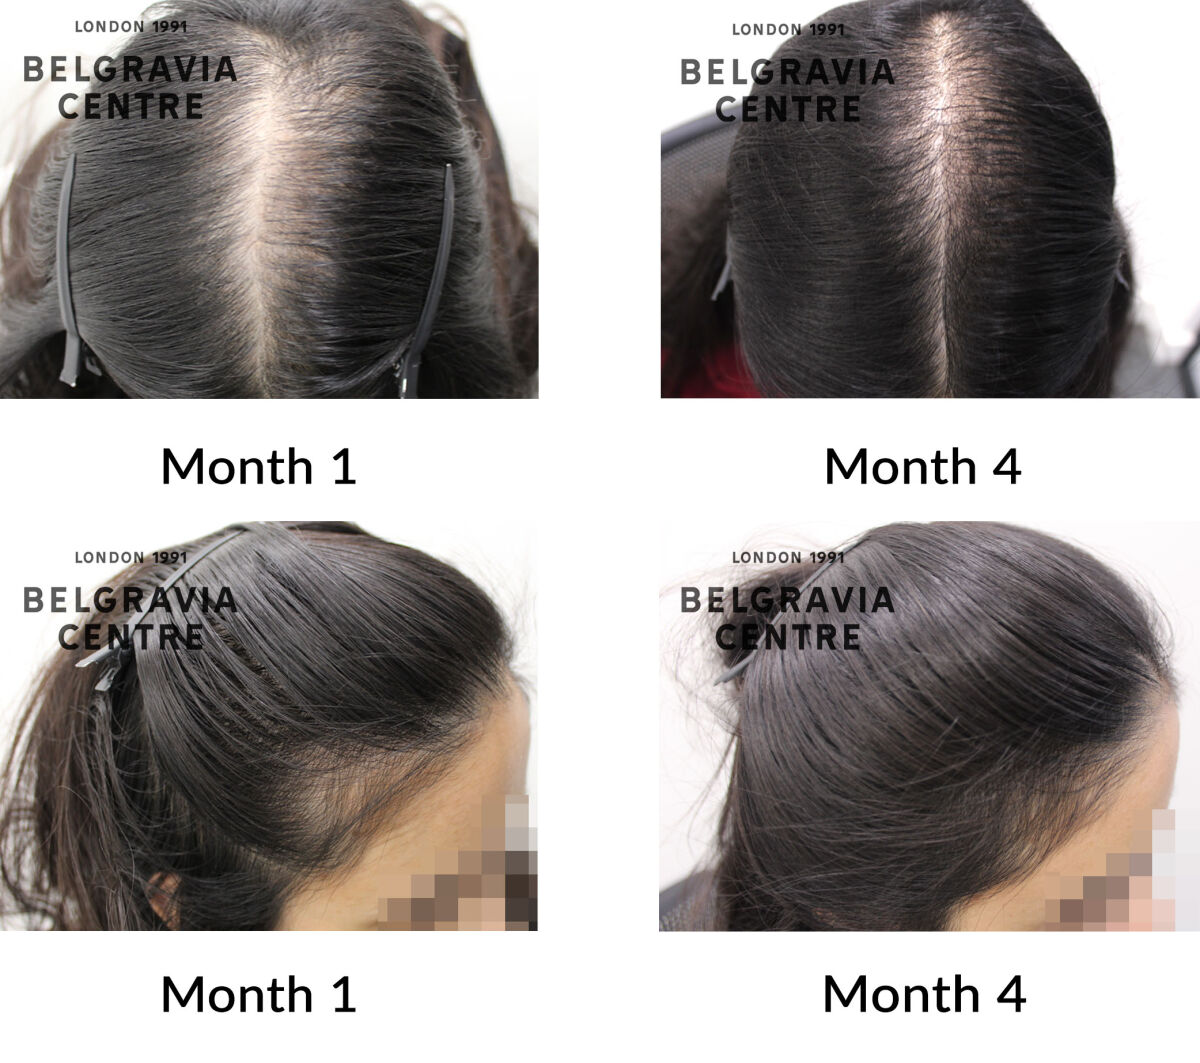 female pattern hair loss and diffuse thinning the belgravia centre 457855